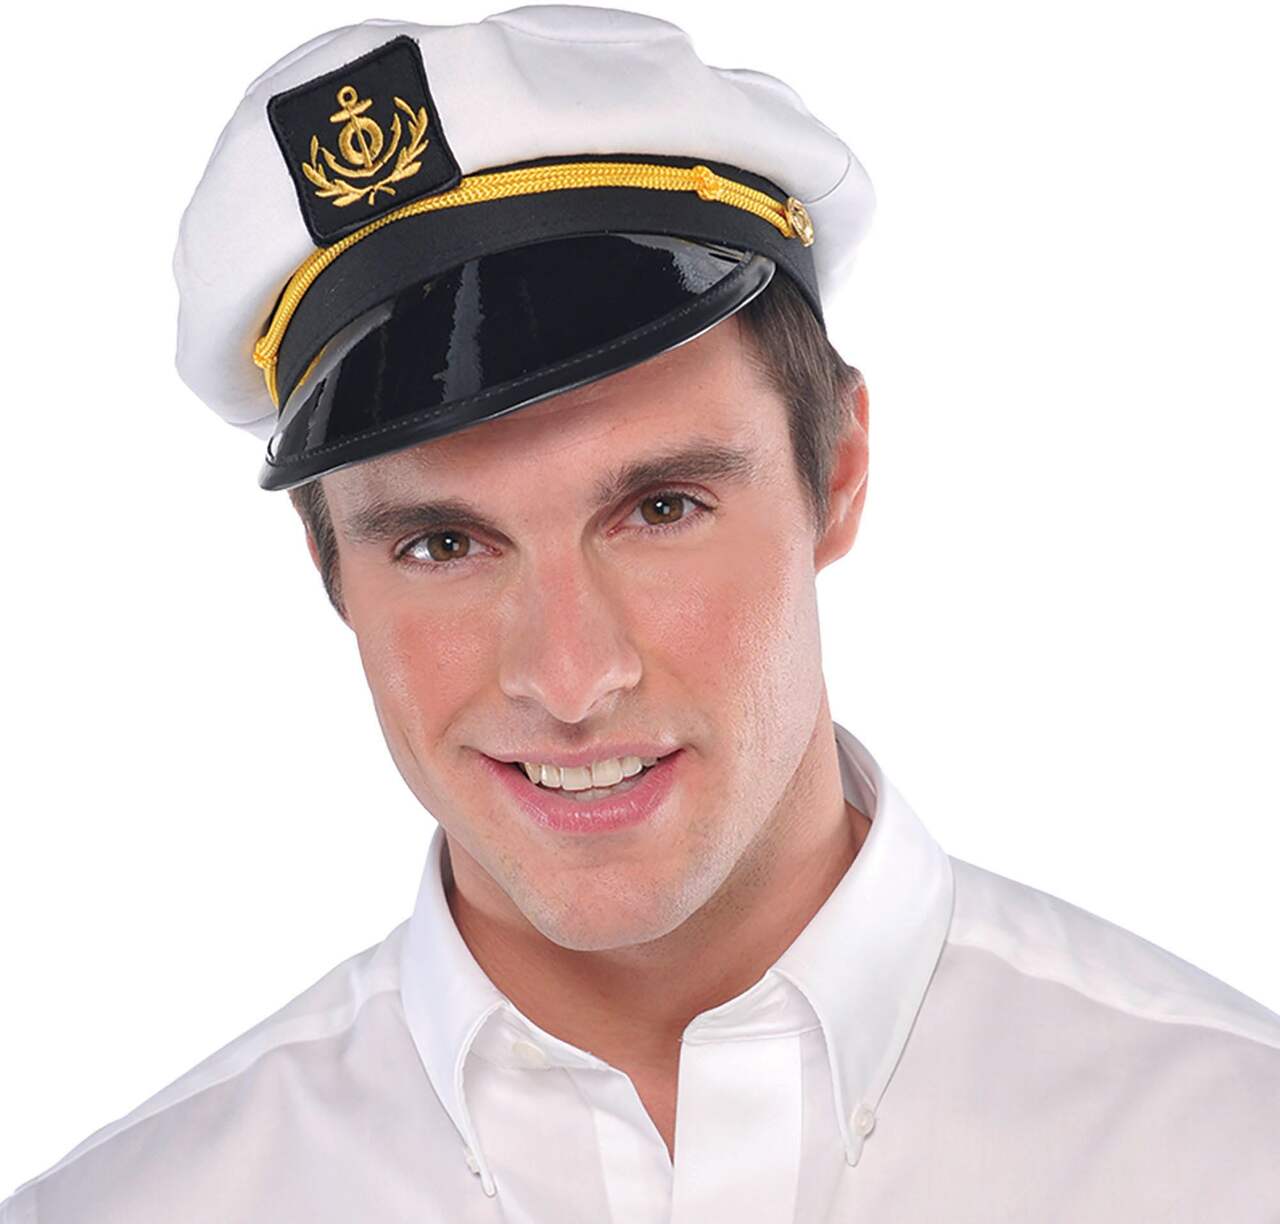 Nautical Boat Captain Hat, Black/White, One Size, Wearable Costume